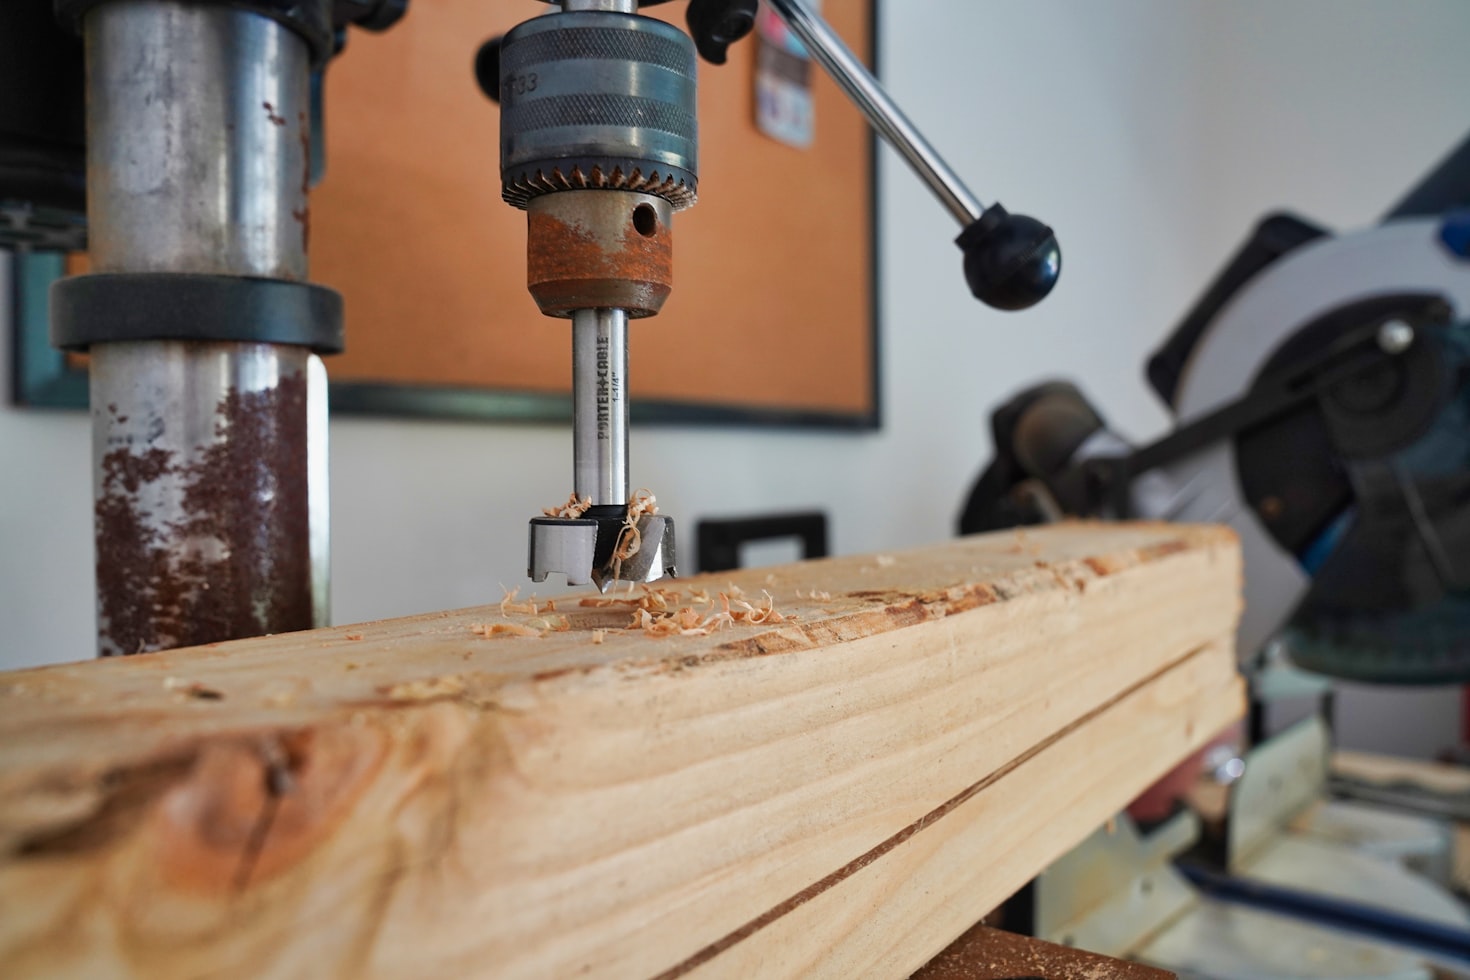 Best Router Table Fence Based On Customer Ratings